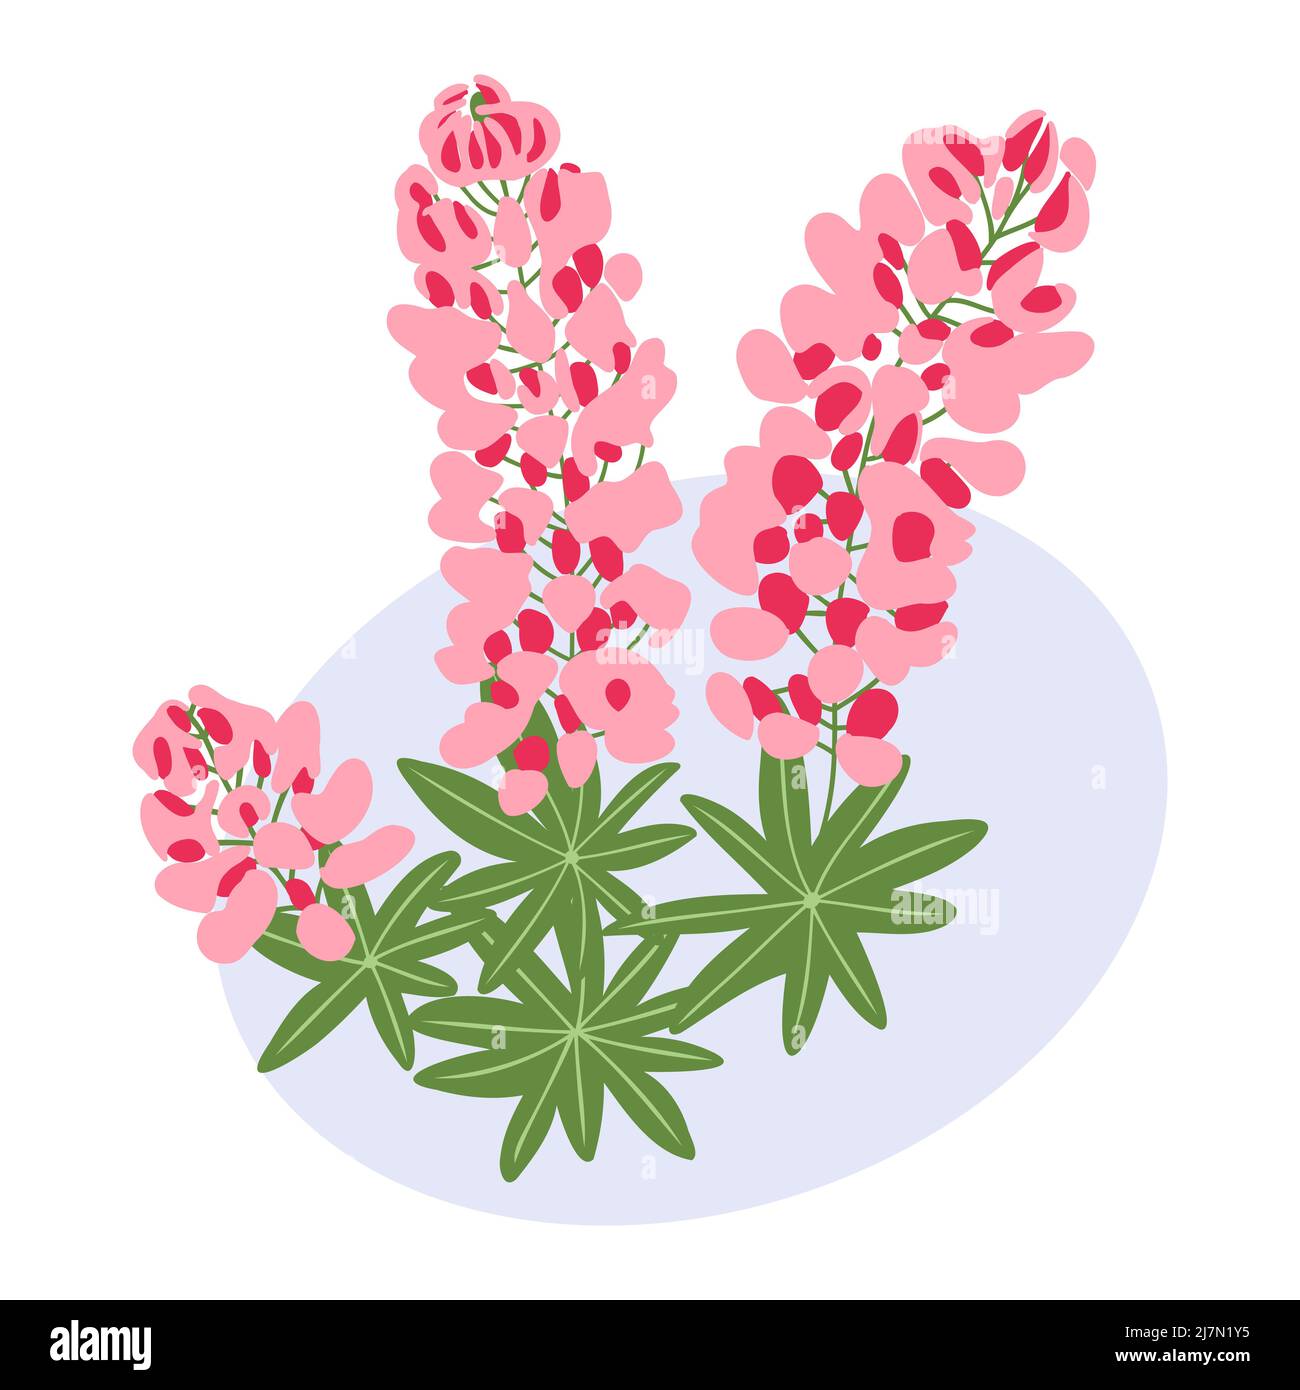 Pink lupine color flower and leaves flat simple abstract blossom flowers on spot background vector illustration Stock Vector